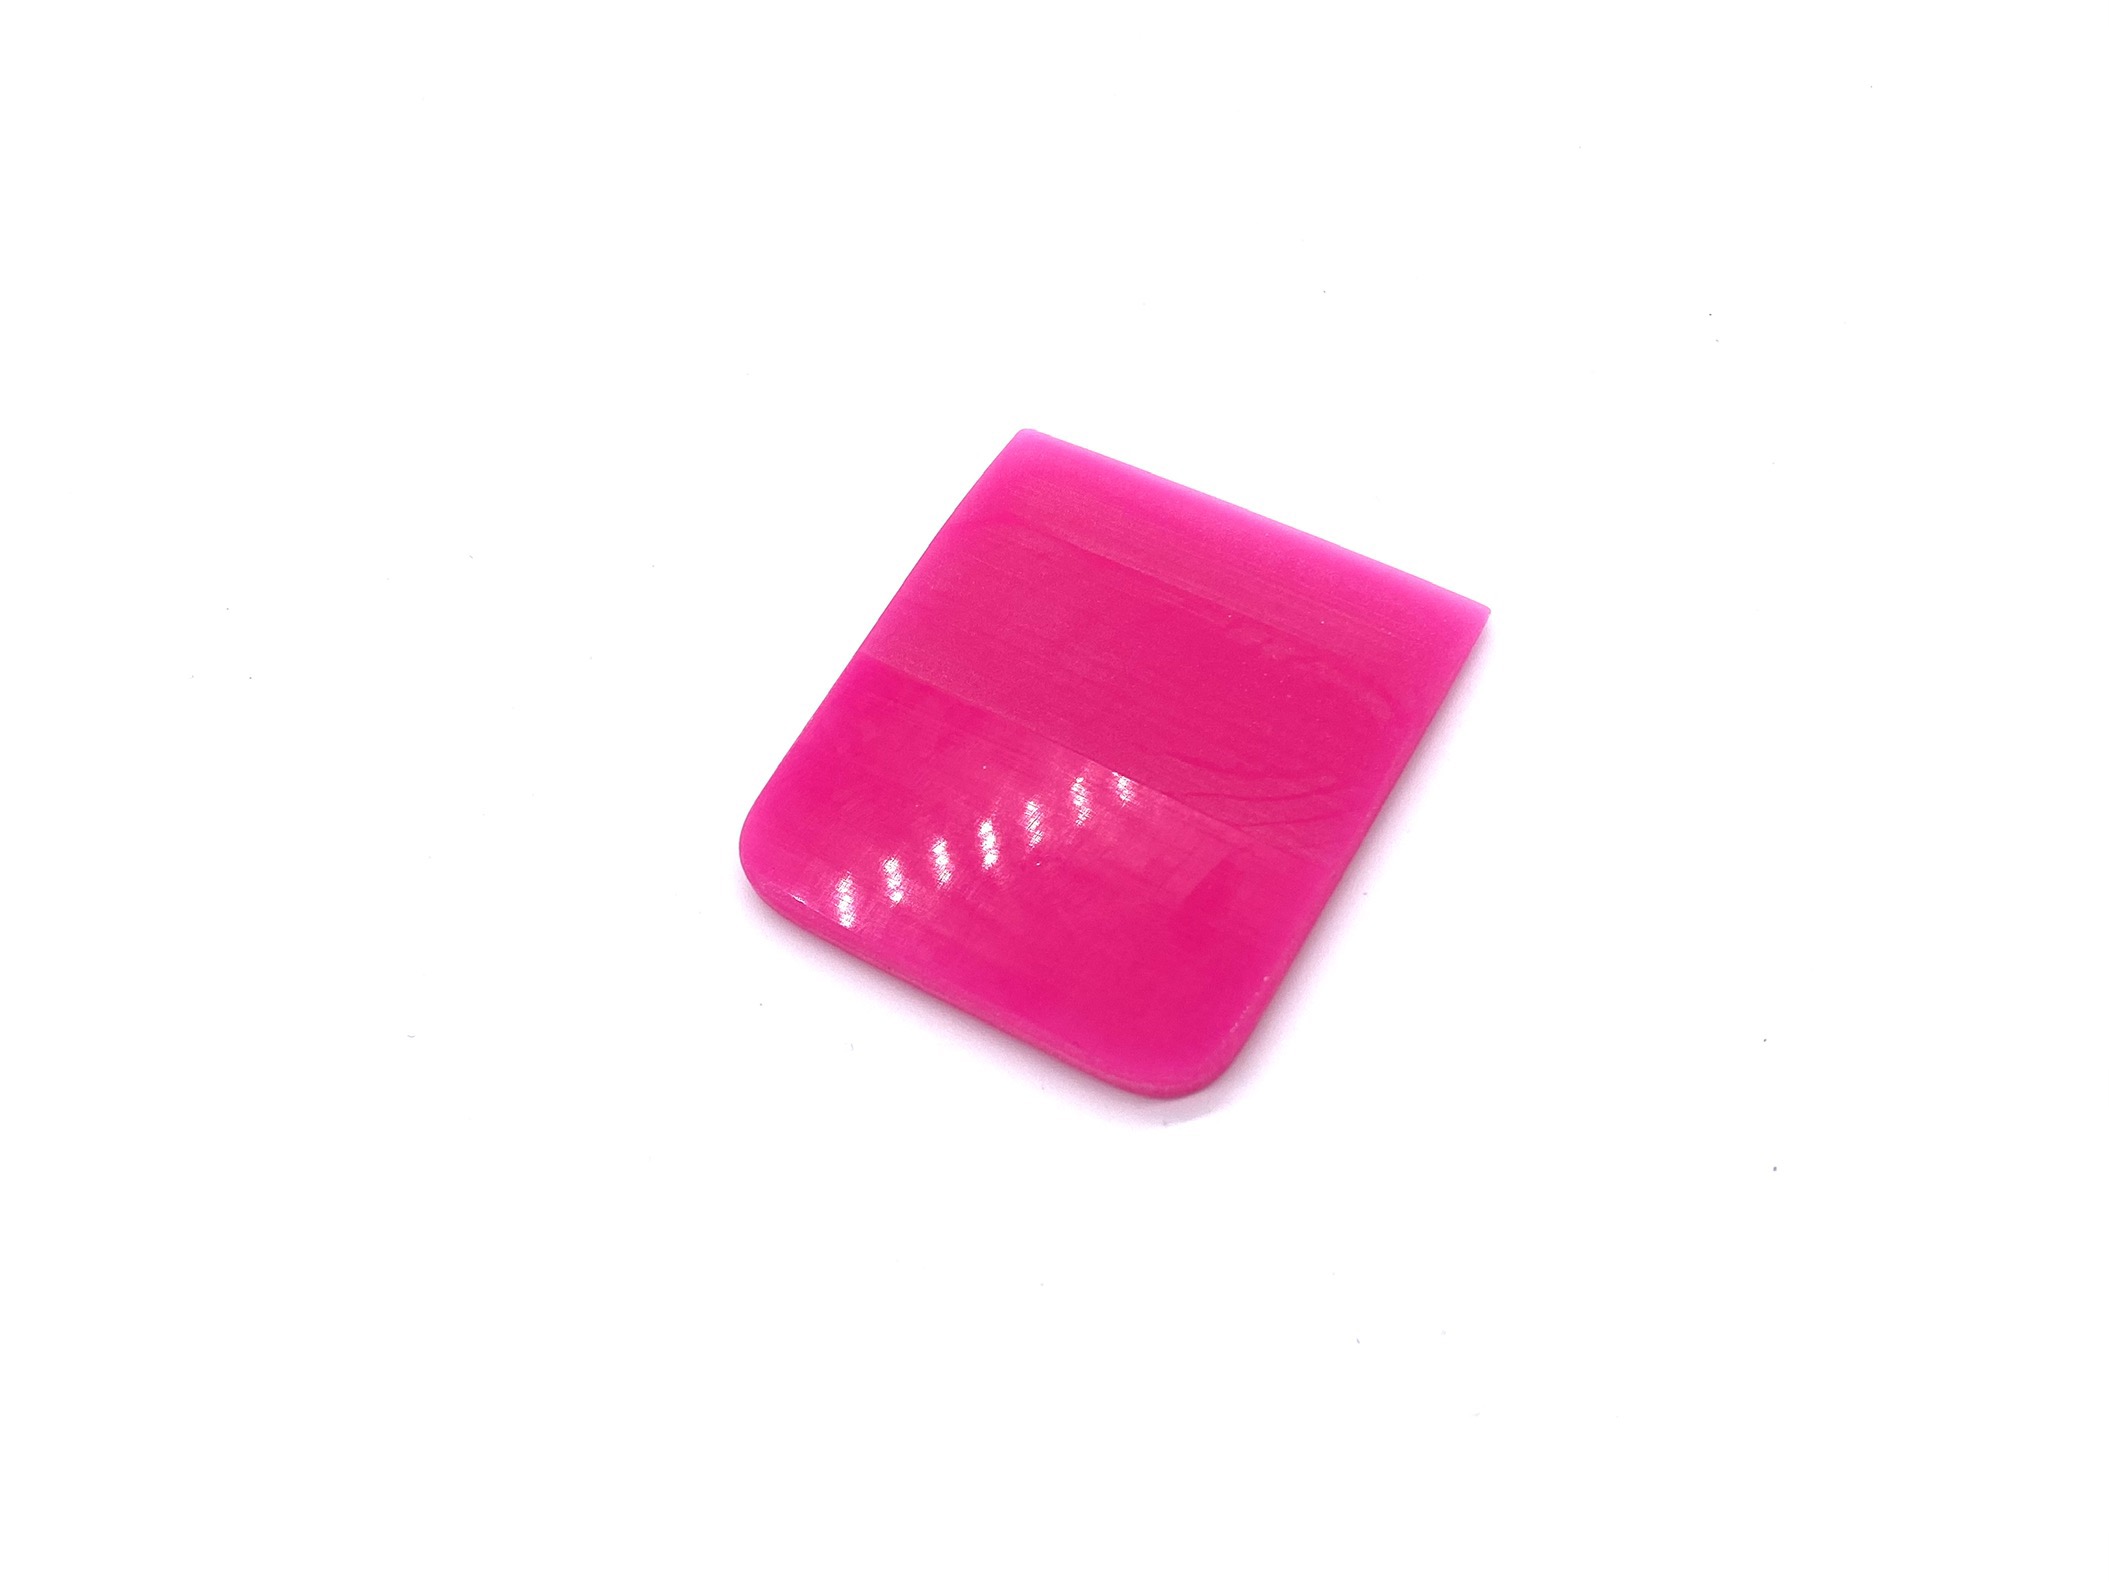 Medium Pink PPF Squeegee – Strictly Wrap Tools